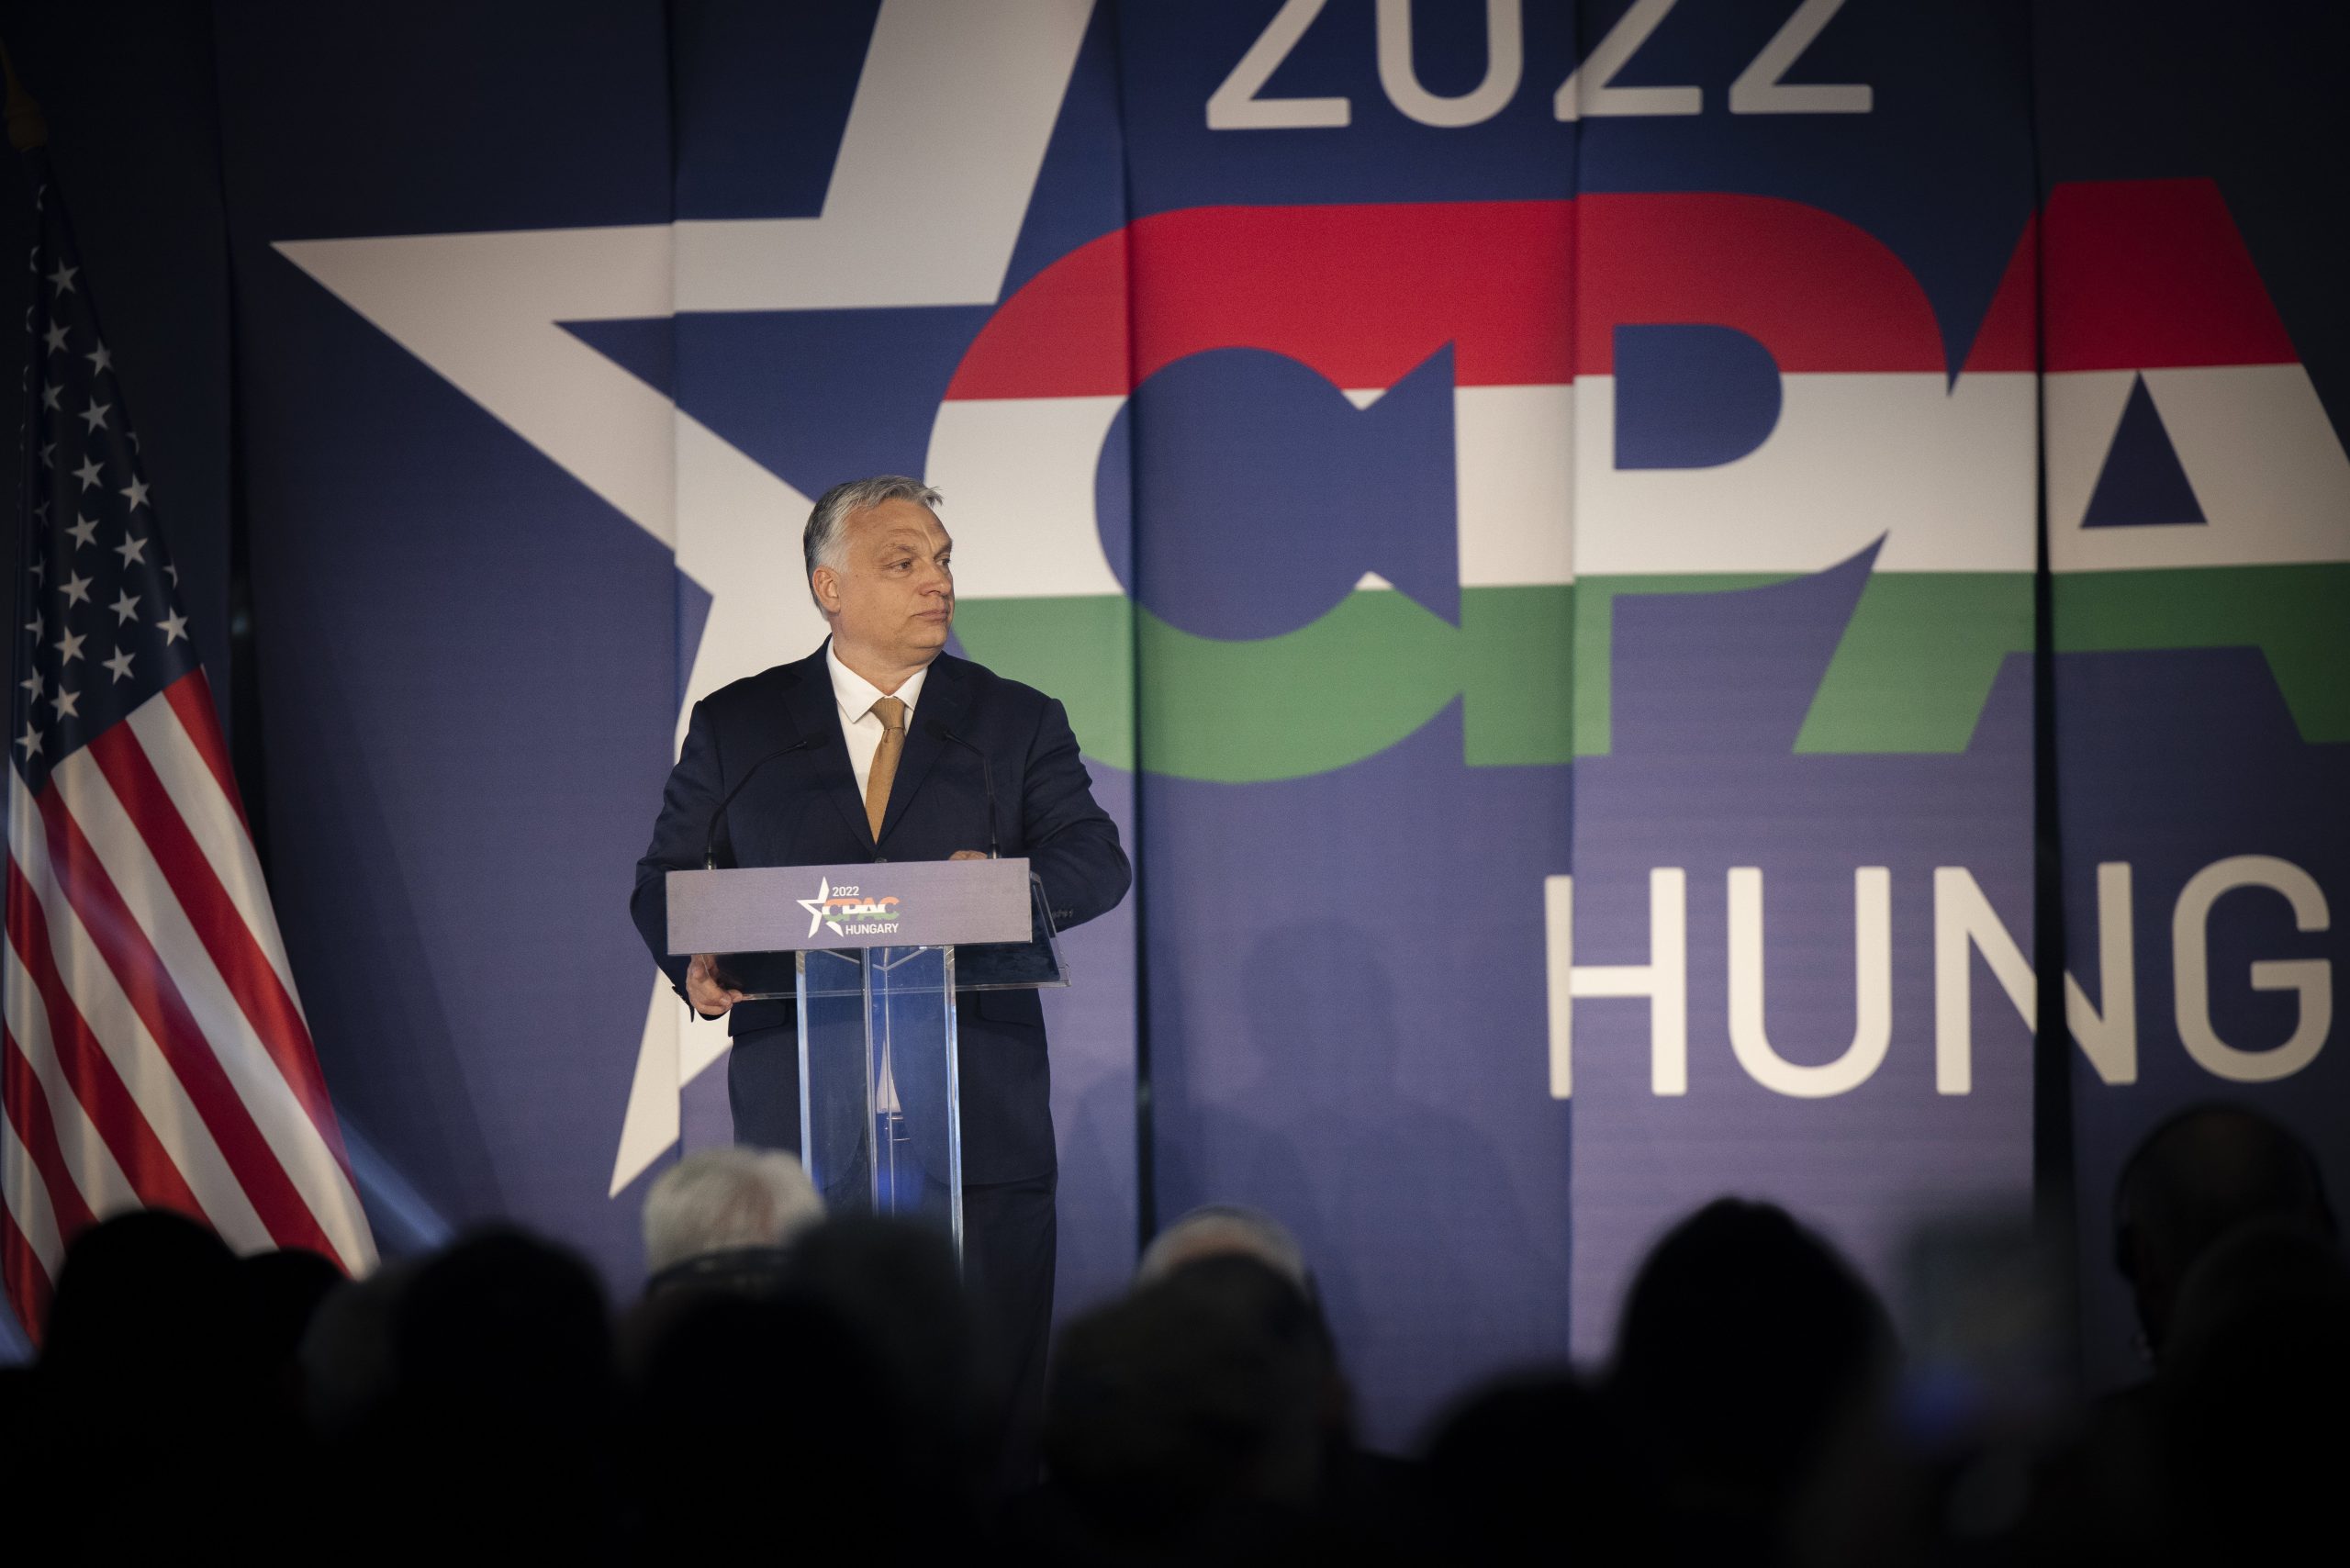 PM Orbán at CPAC: Hungary Has 'Antidote for Progressive Dominance'